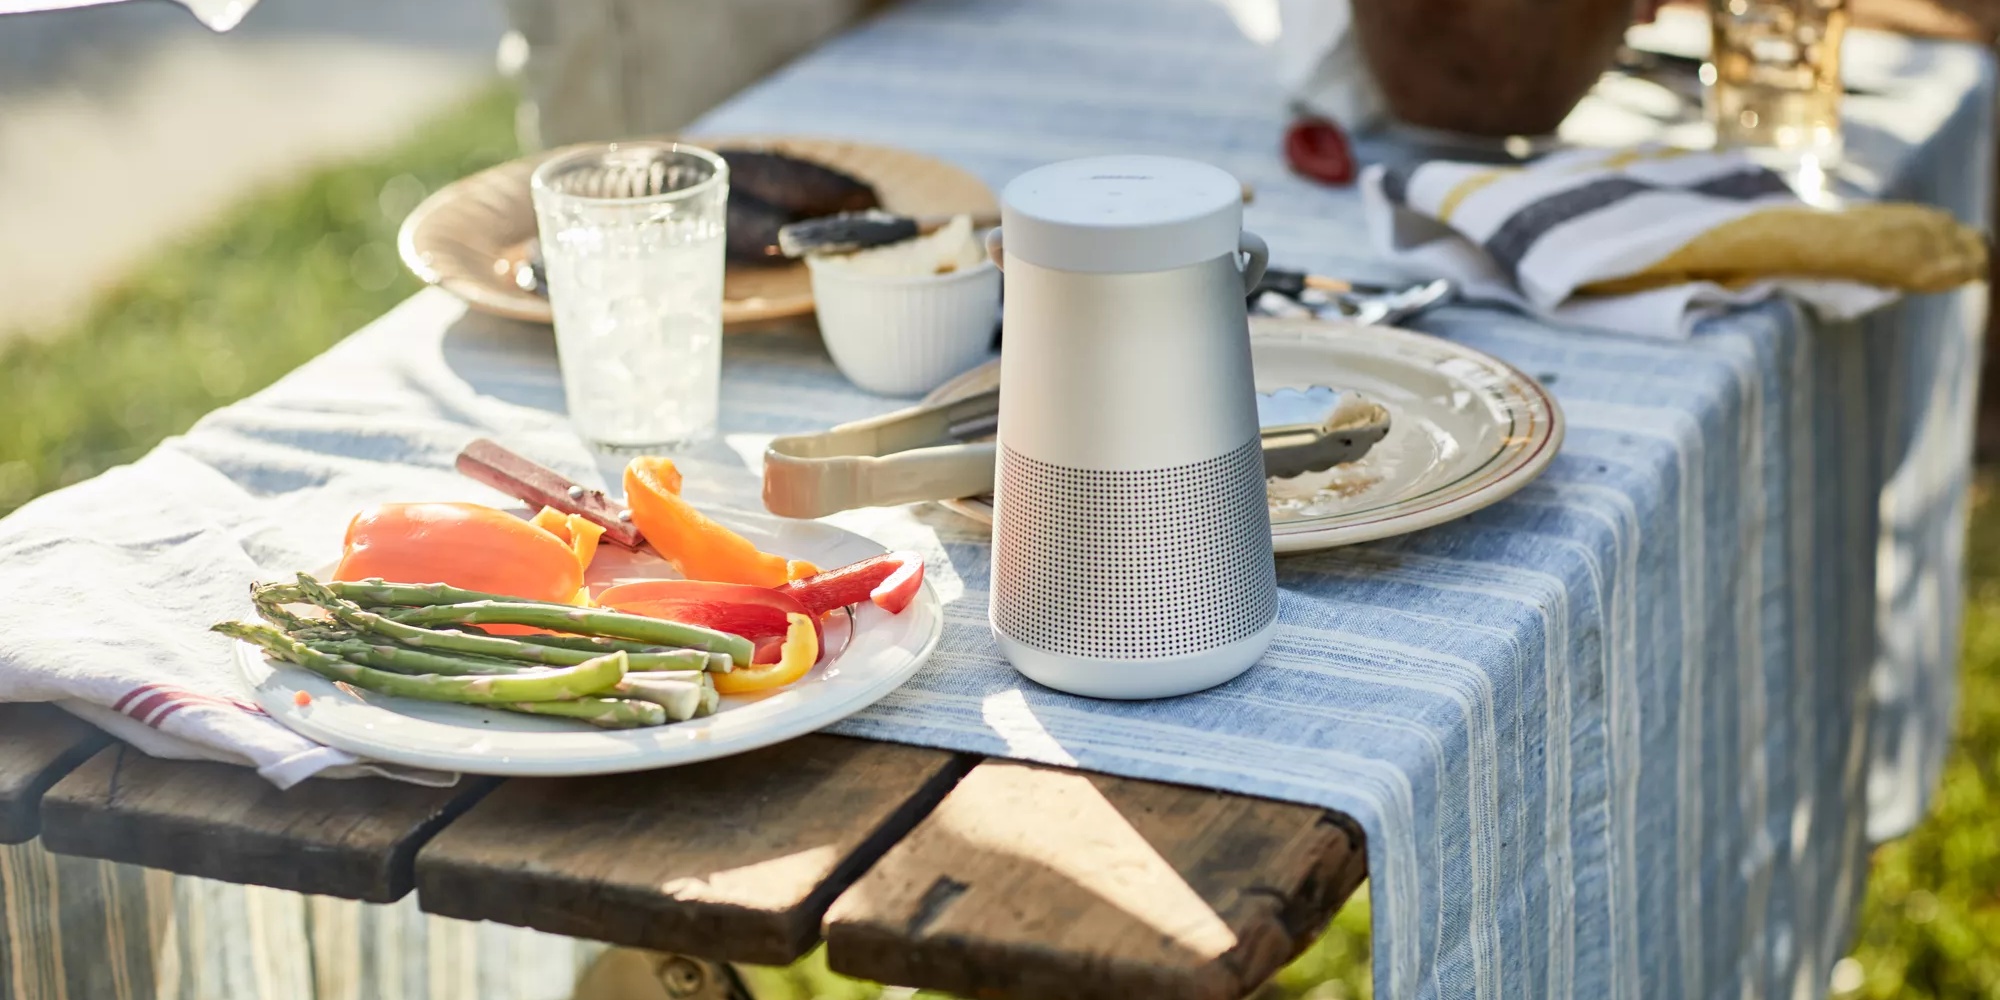 SoundLink Revolve+ II Bluetooth speaker on a table at an outdoor barbecue